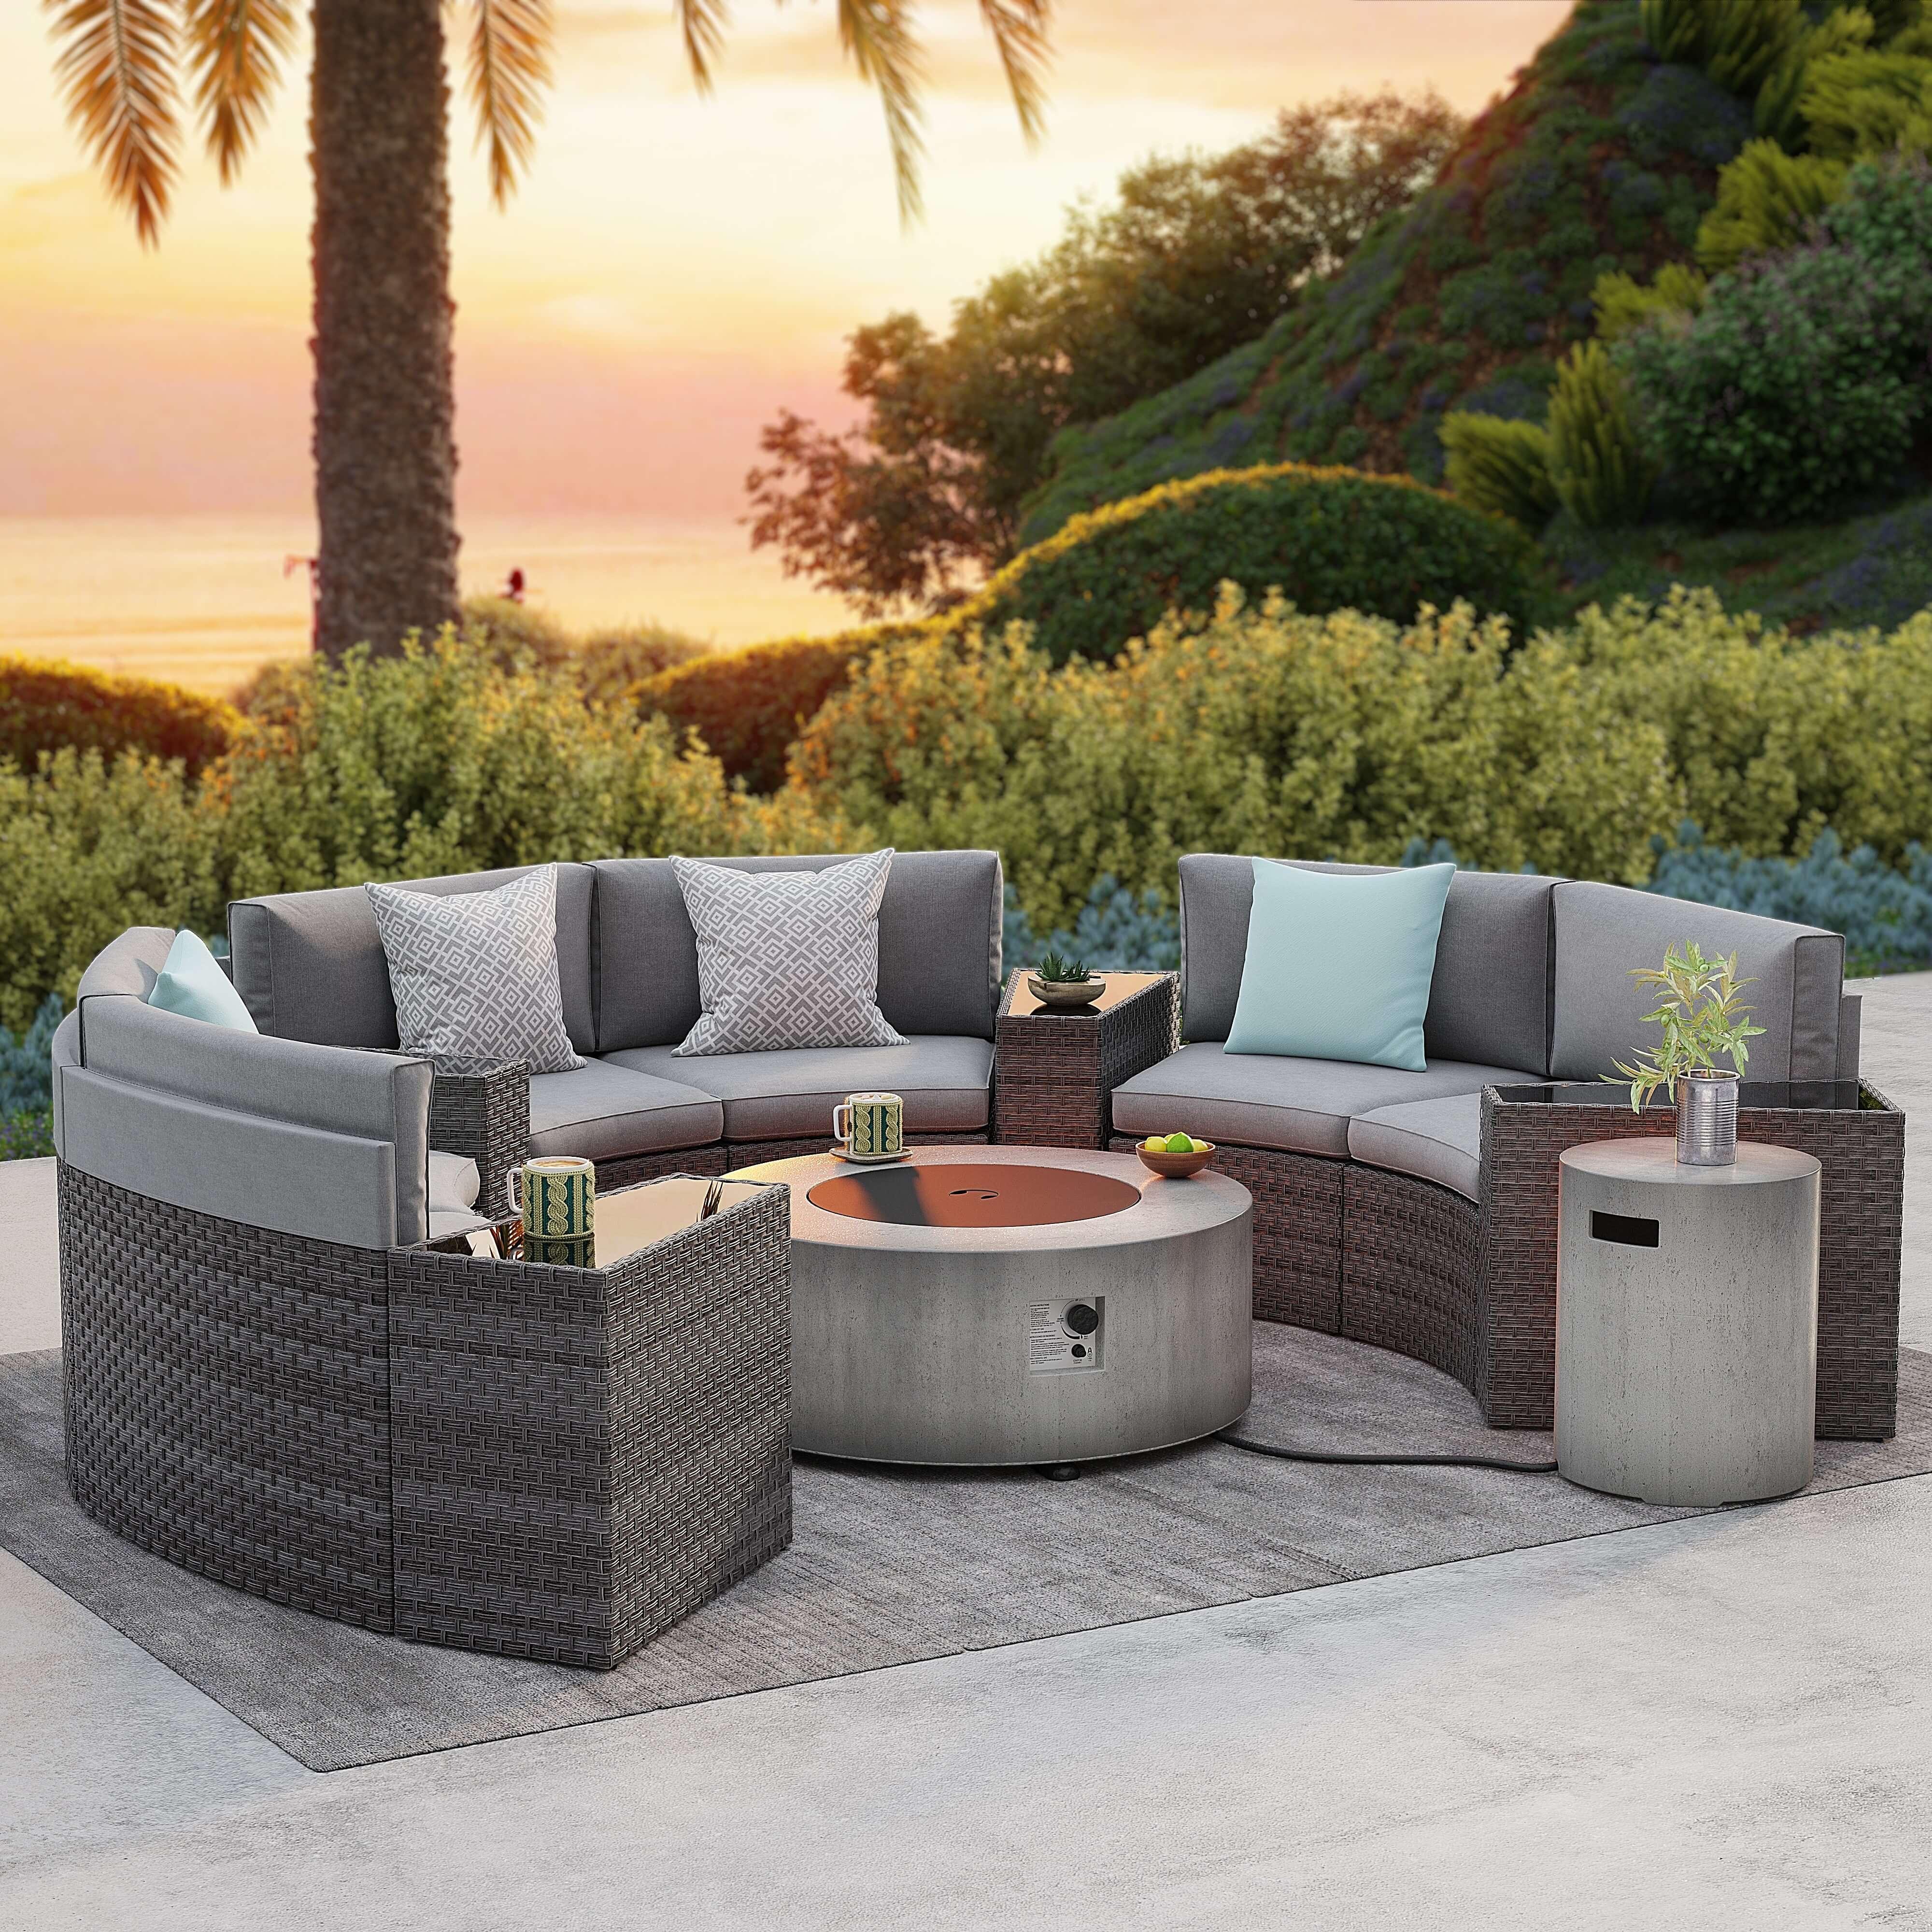 Boboli Modern Wicker Outdoor Furniture, 6-seater Grey Wicker Curved Sectional sofas with grey cushions, 4 side tables + 1 grey Propane Fire Pit with tank holder, front view- Jardina Furniture #color_Grey